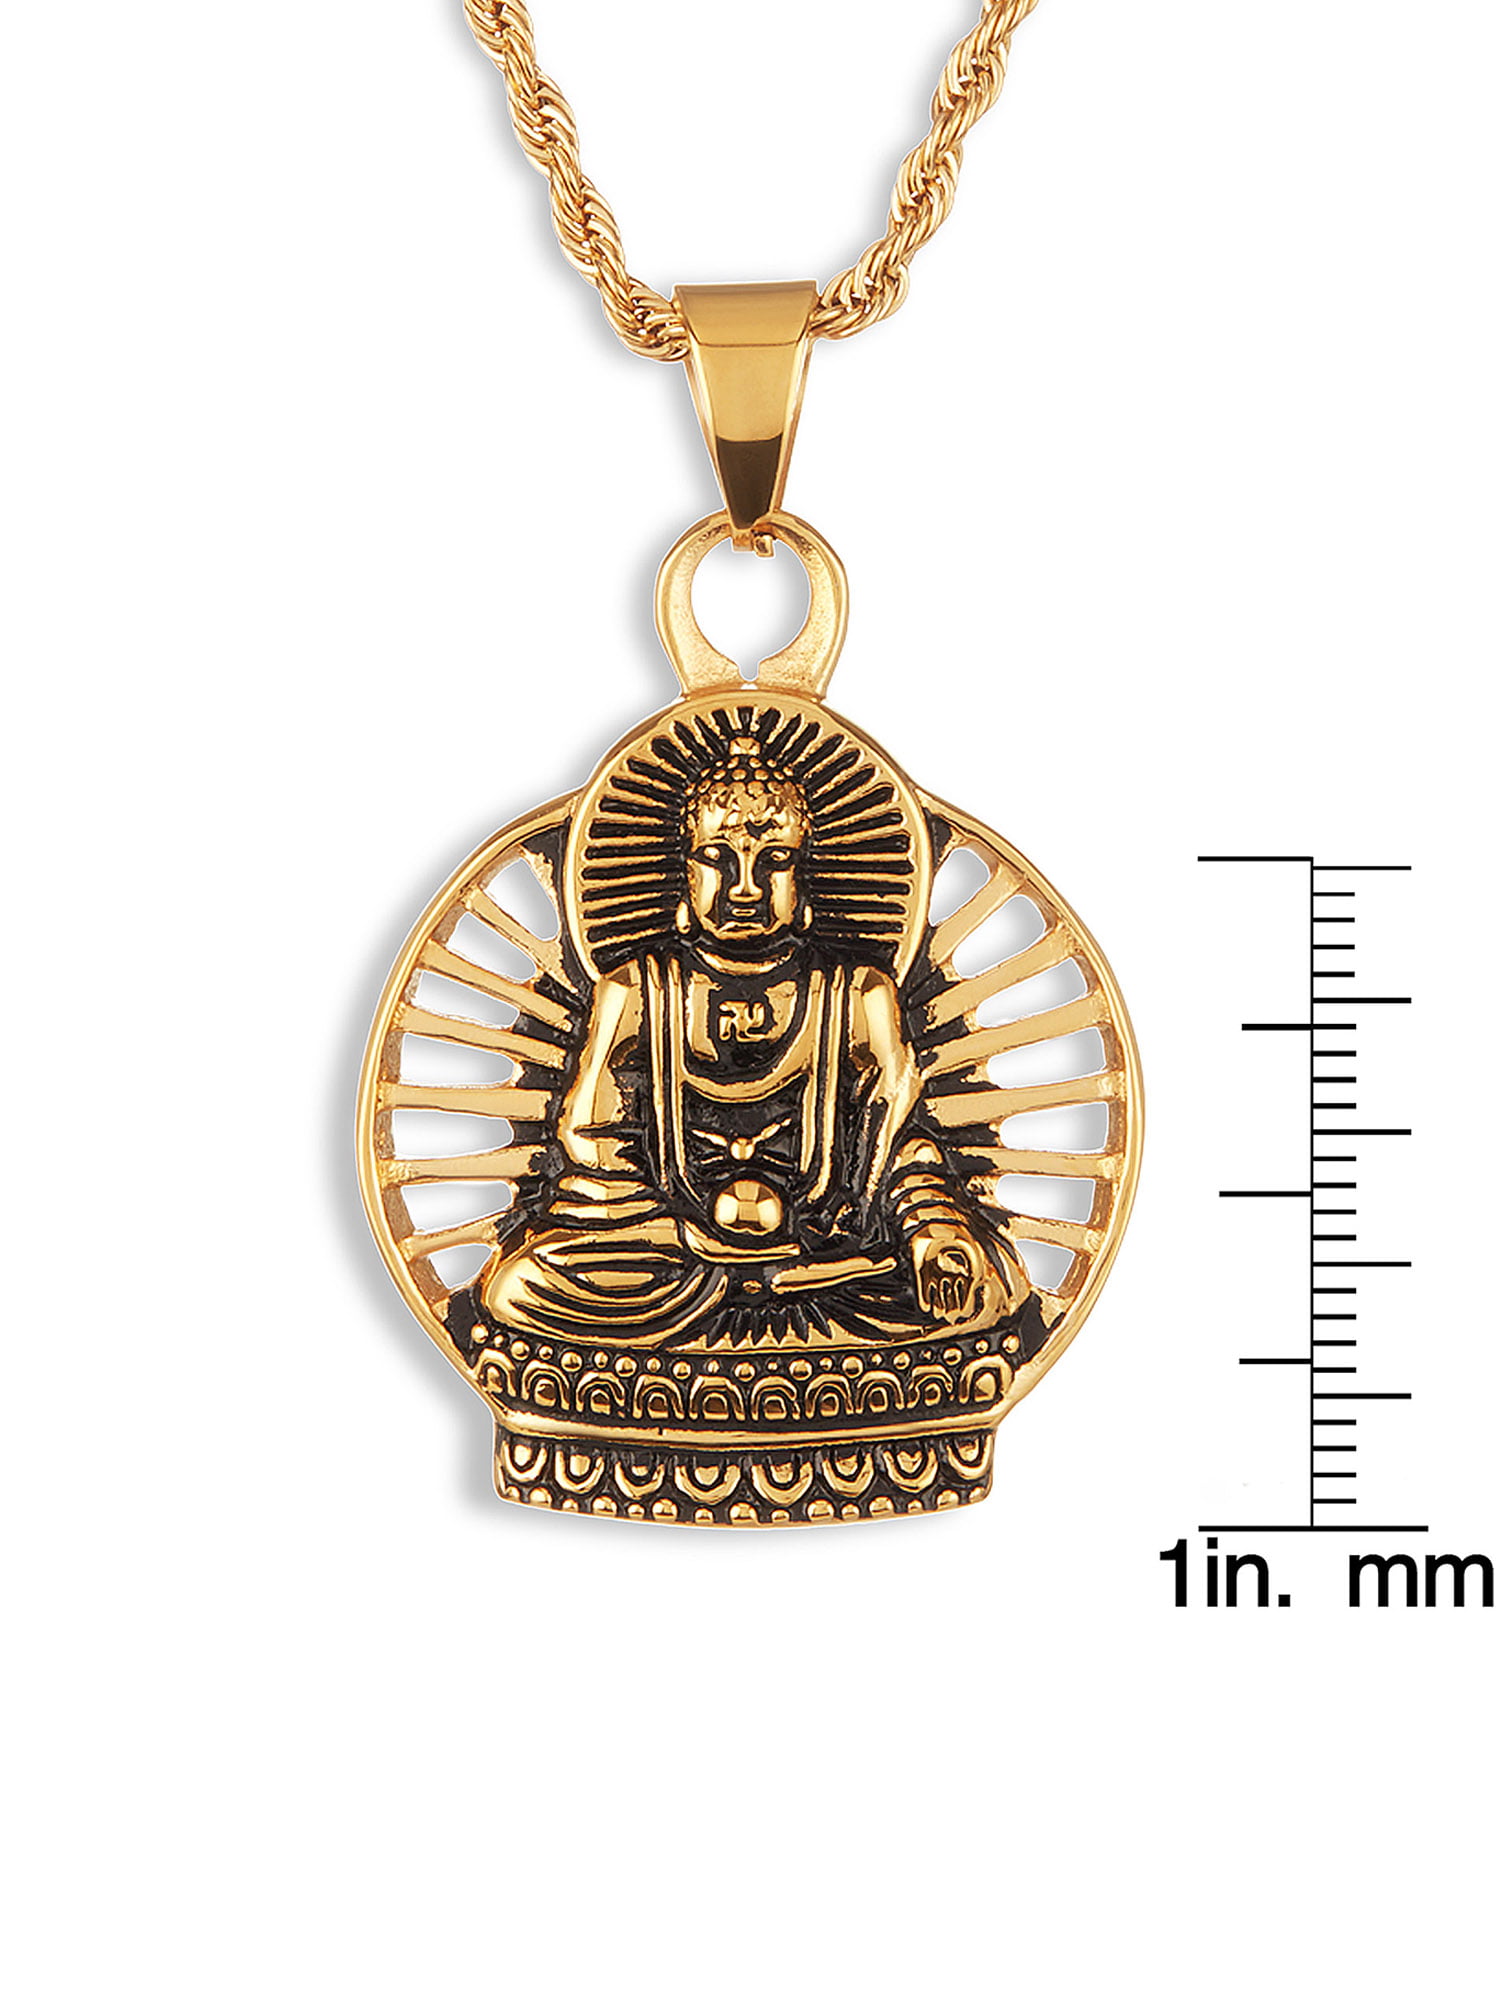 Details about   Cz Buddha Pendant Gold Stainless Steel Necklace Round Box Link Chain 